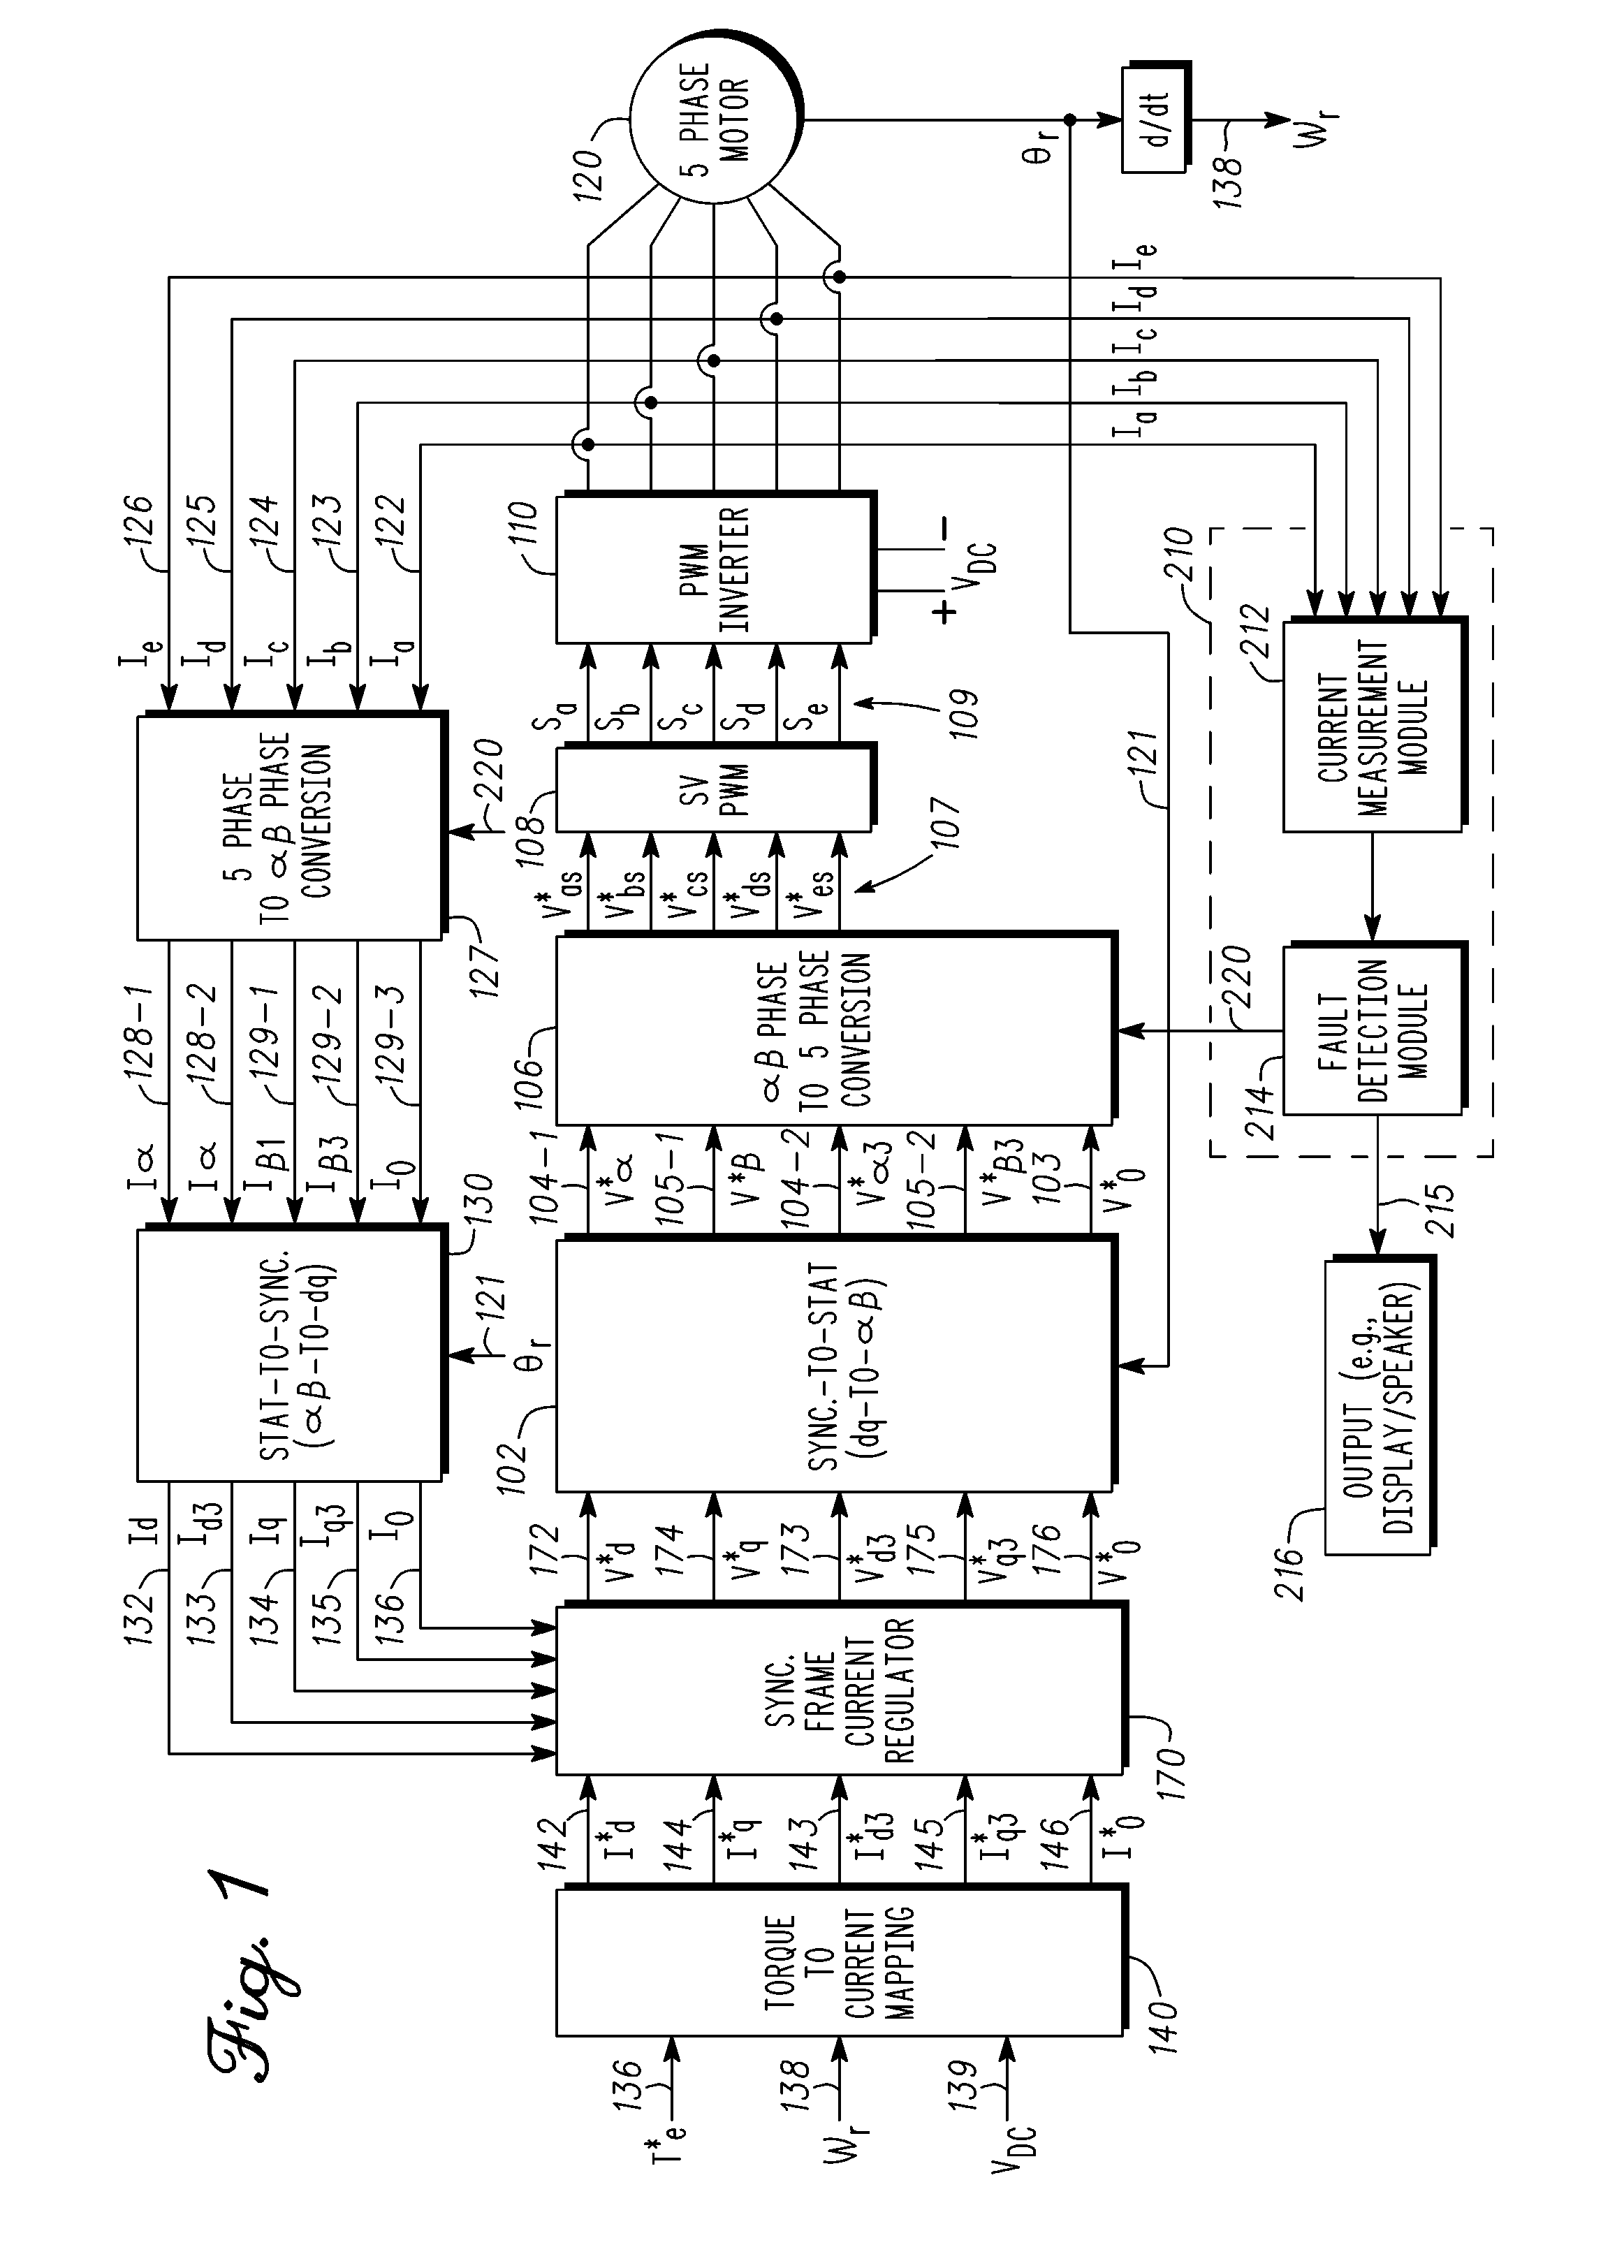 Methods, systems and apparatus for synchronous current regulation of a five-phase machine